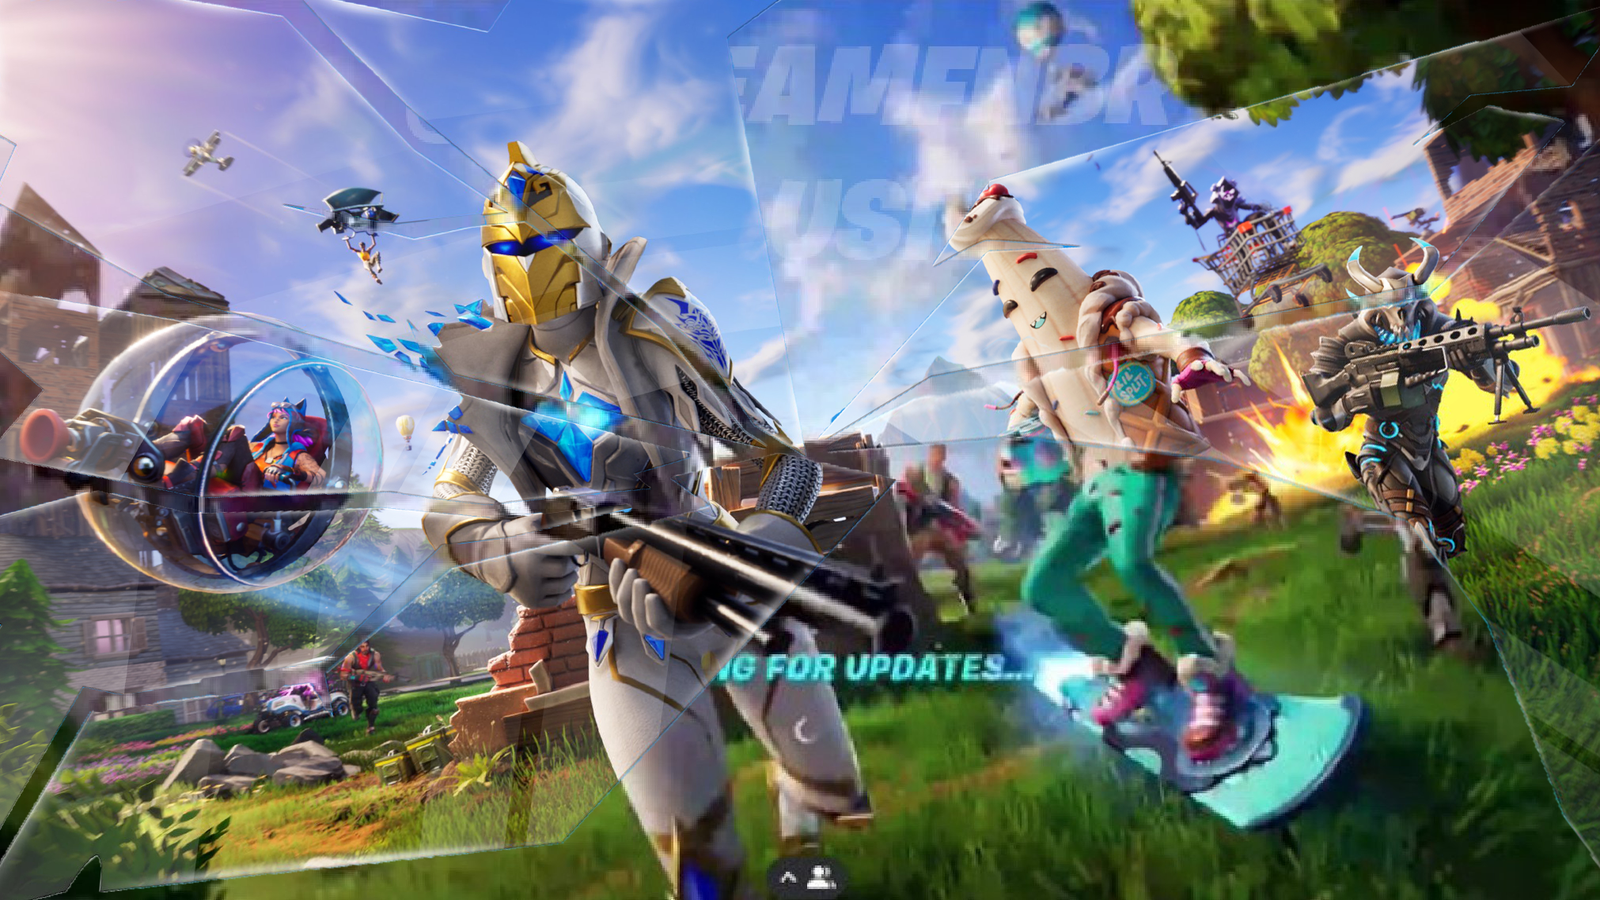 100+] Fortnite Pc Wallpapers